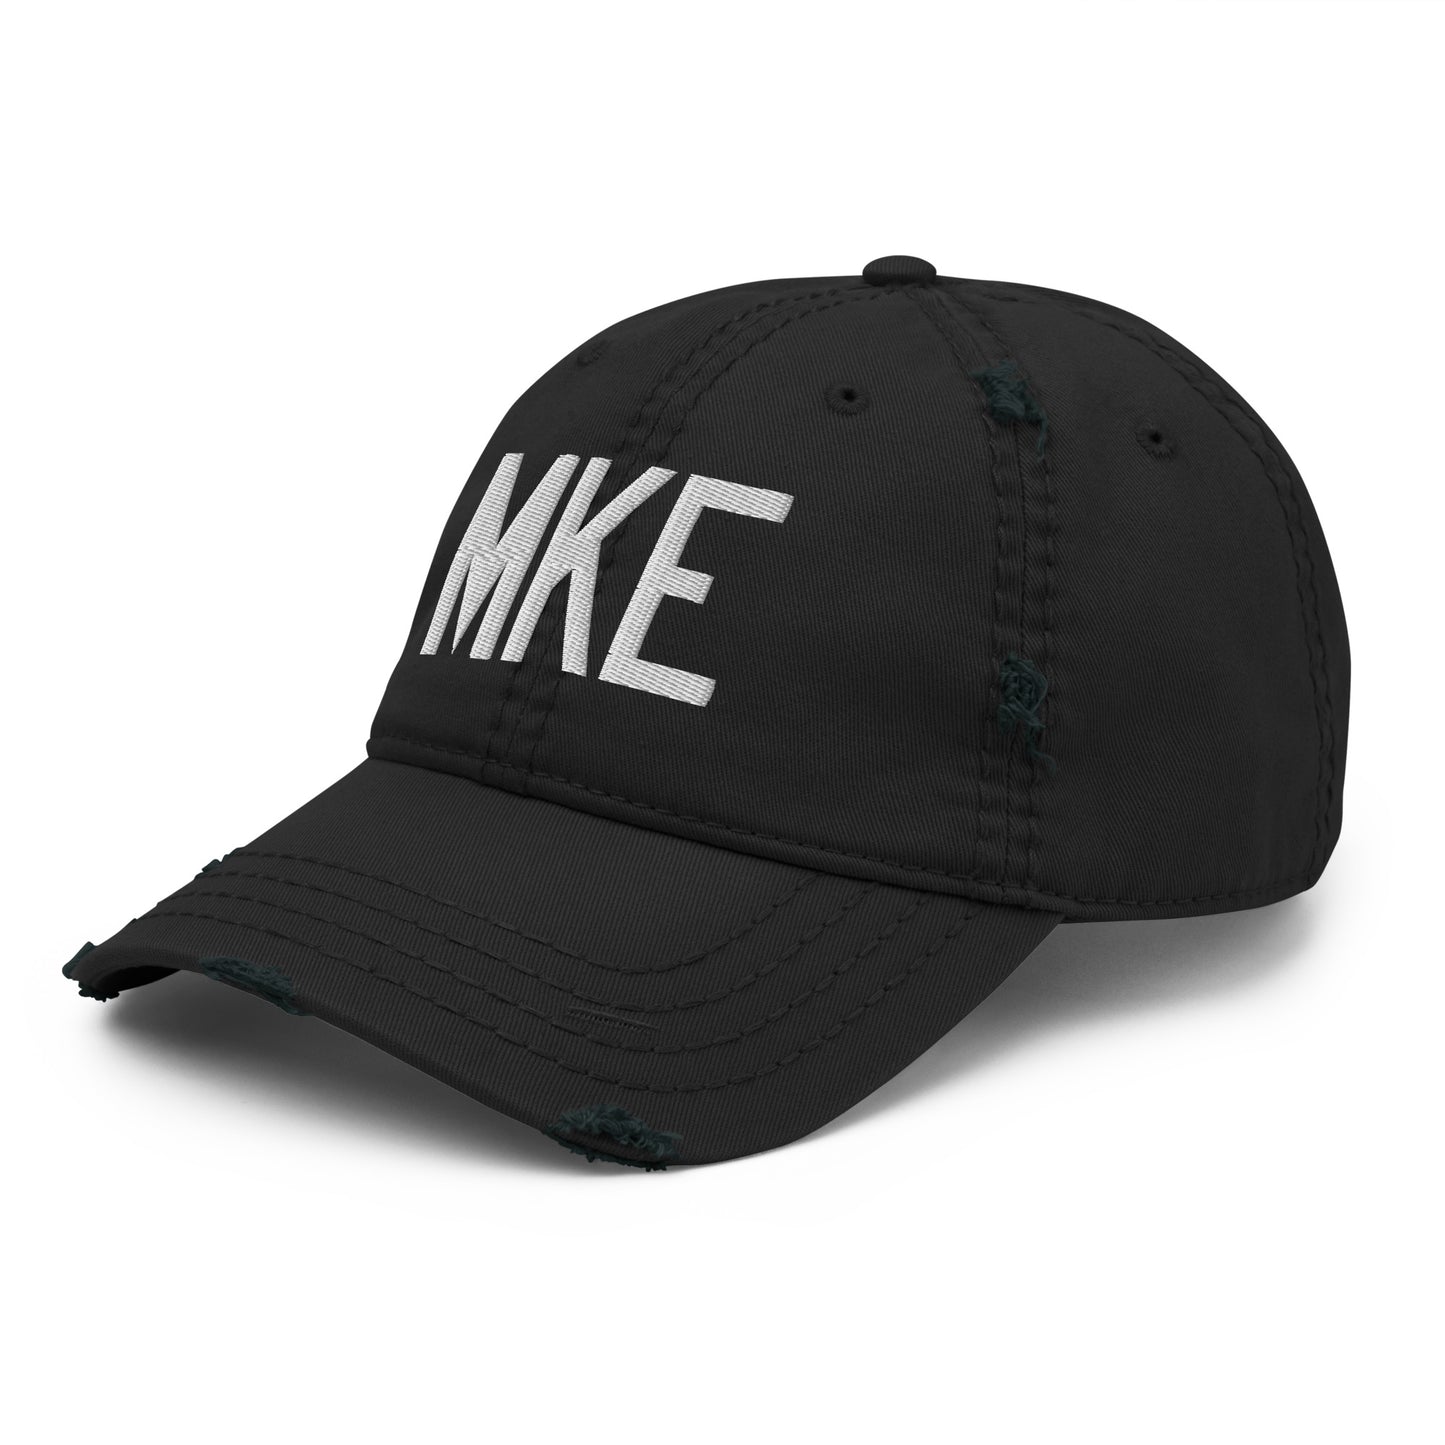 Airport Code Distressed Hat - White • MKE Milwaukee • YHM Designs - Image 11